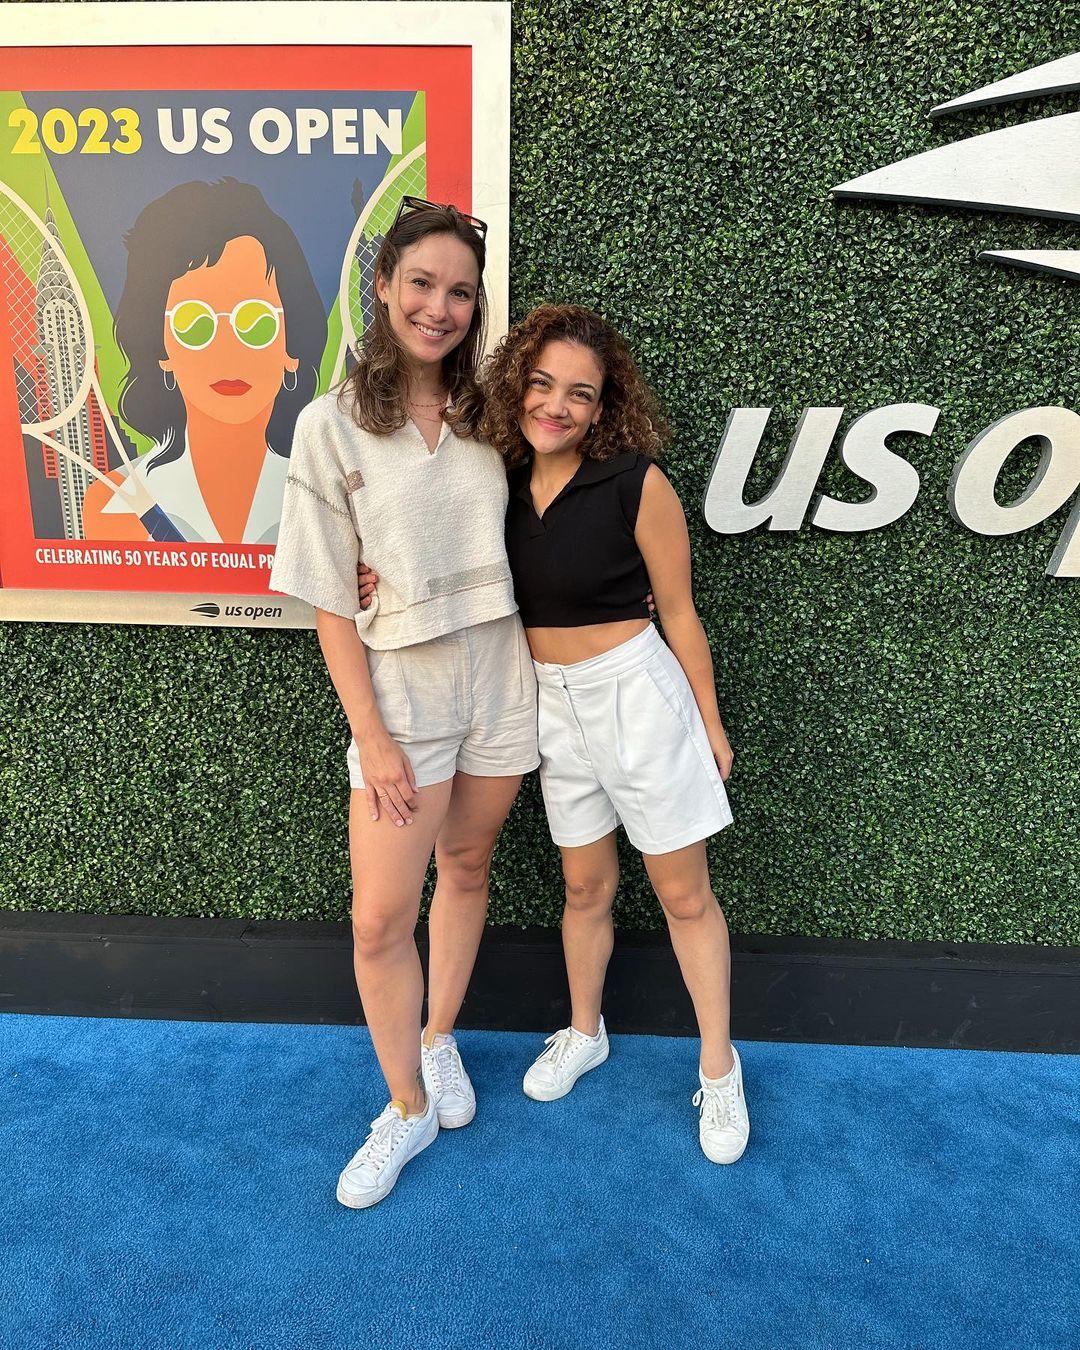 Laurie Hernandez Shares Post-Olympics Journey With Charlotte Drury